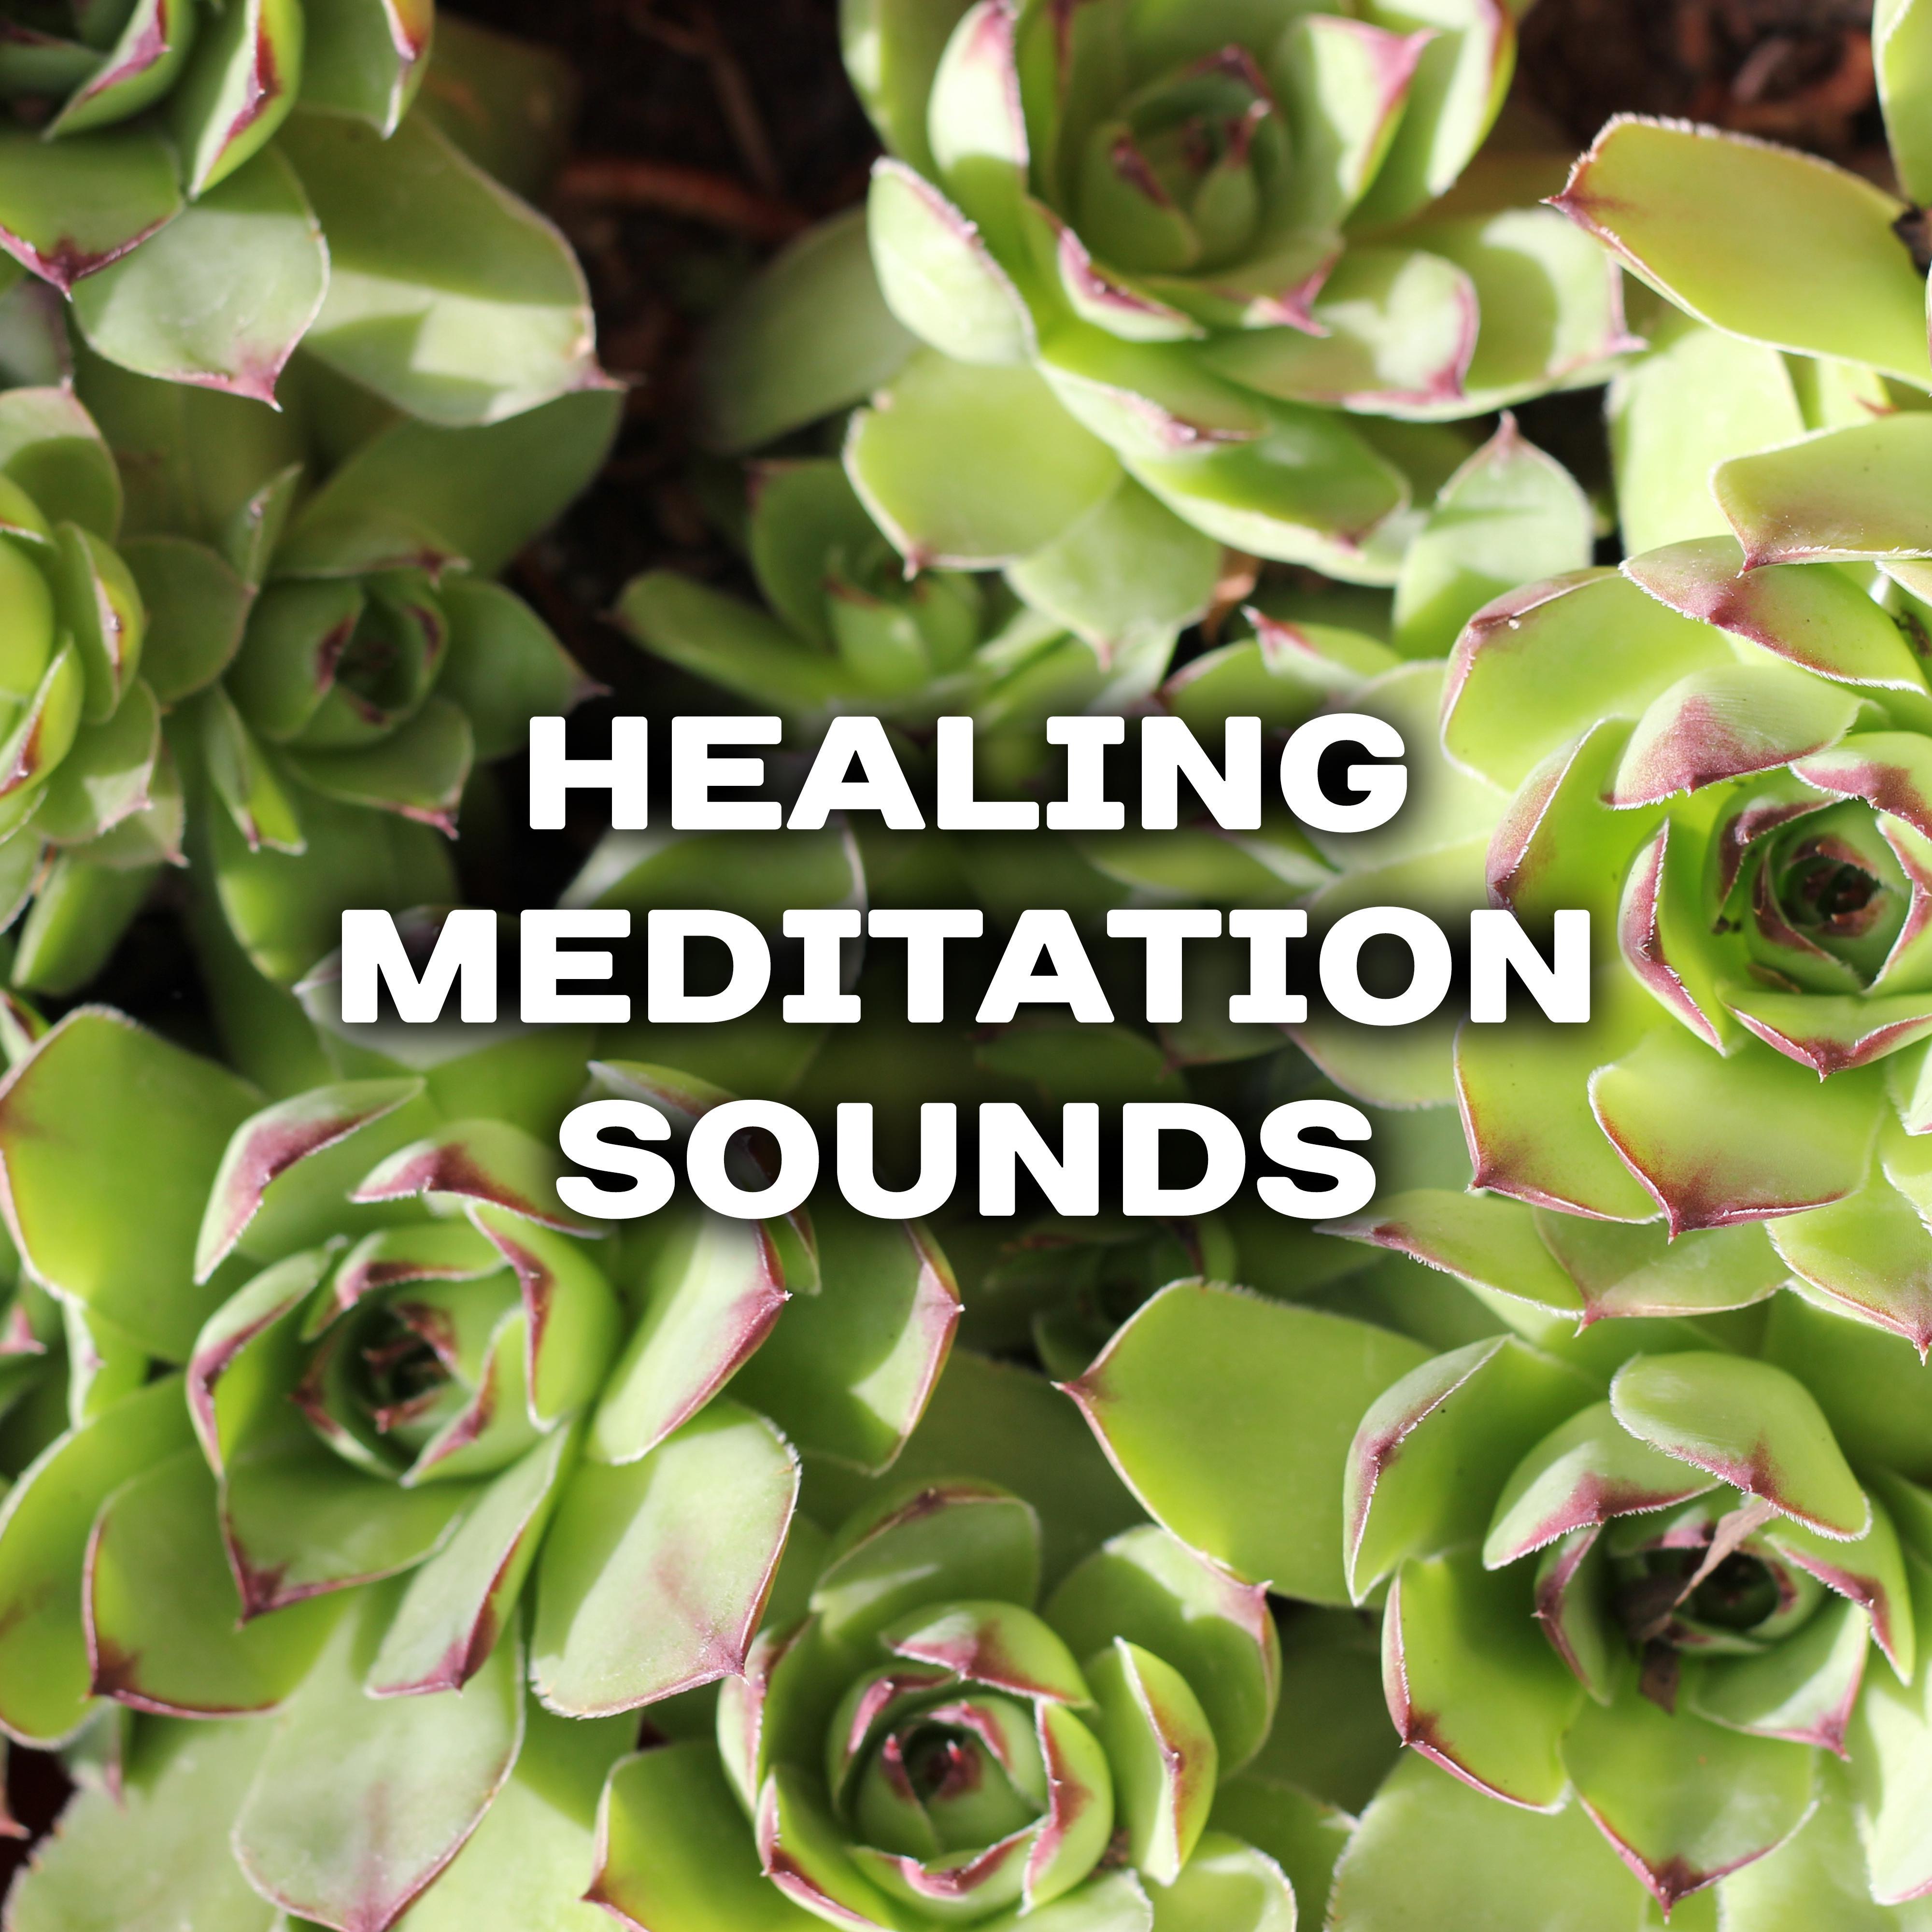 Healing Meditation Sounds – Rest with New Age Music, Buddha Relaxation, Meditate to Calm Mind & Body